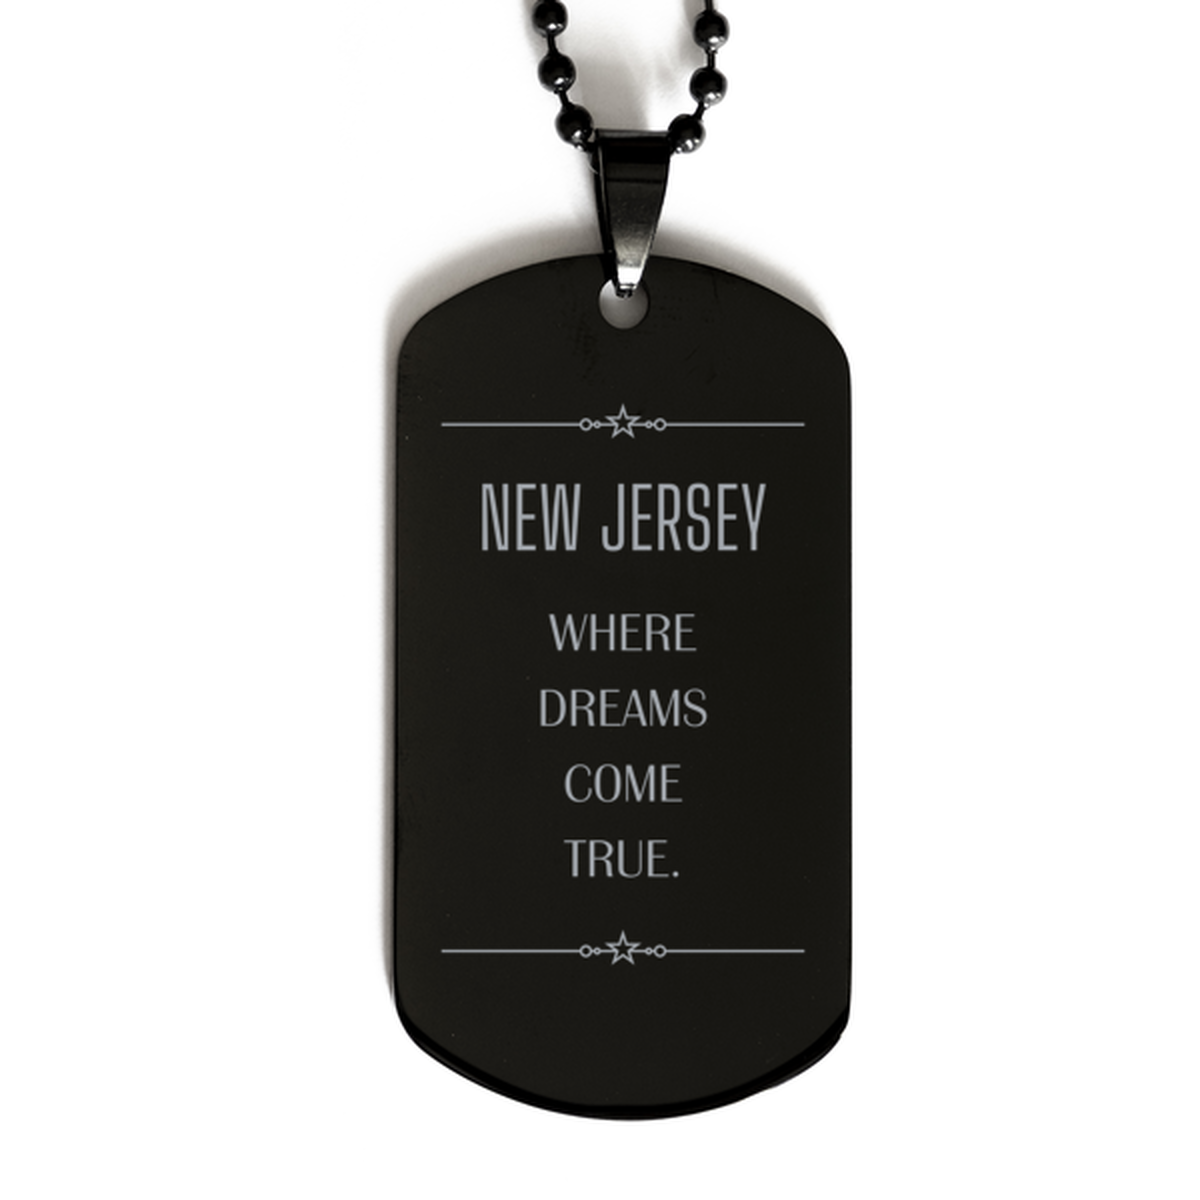 Love New Jersey State Black Dog Tag, New Jersey Where dreams come true, Birthday Inspirational Gifts For New Jersey Men, Women, Friends